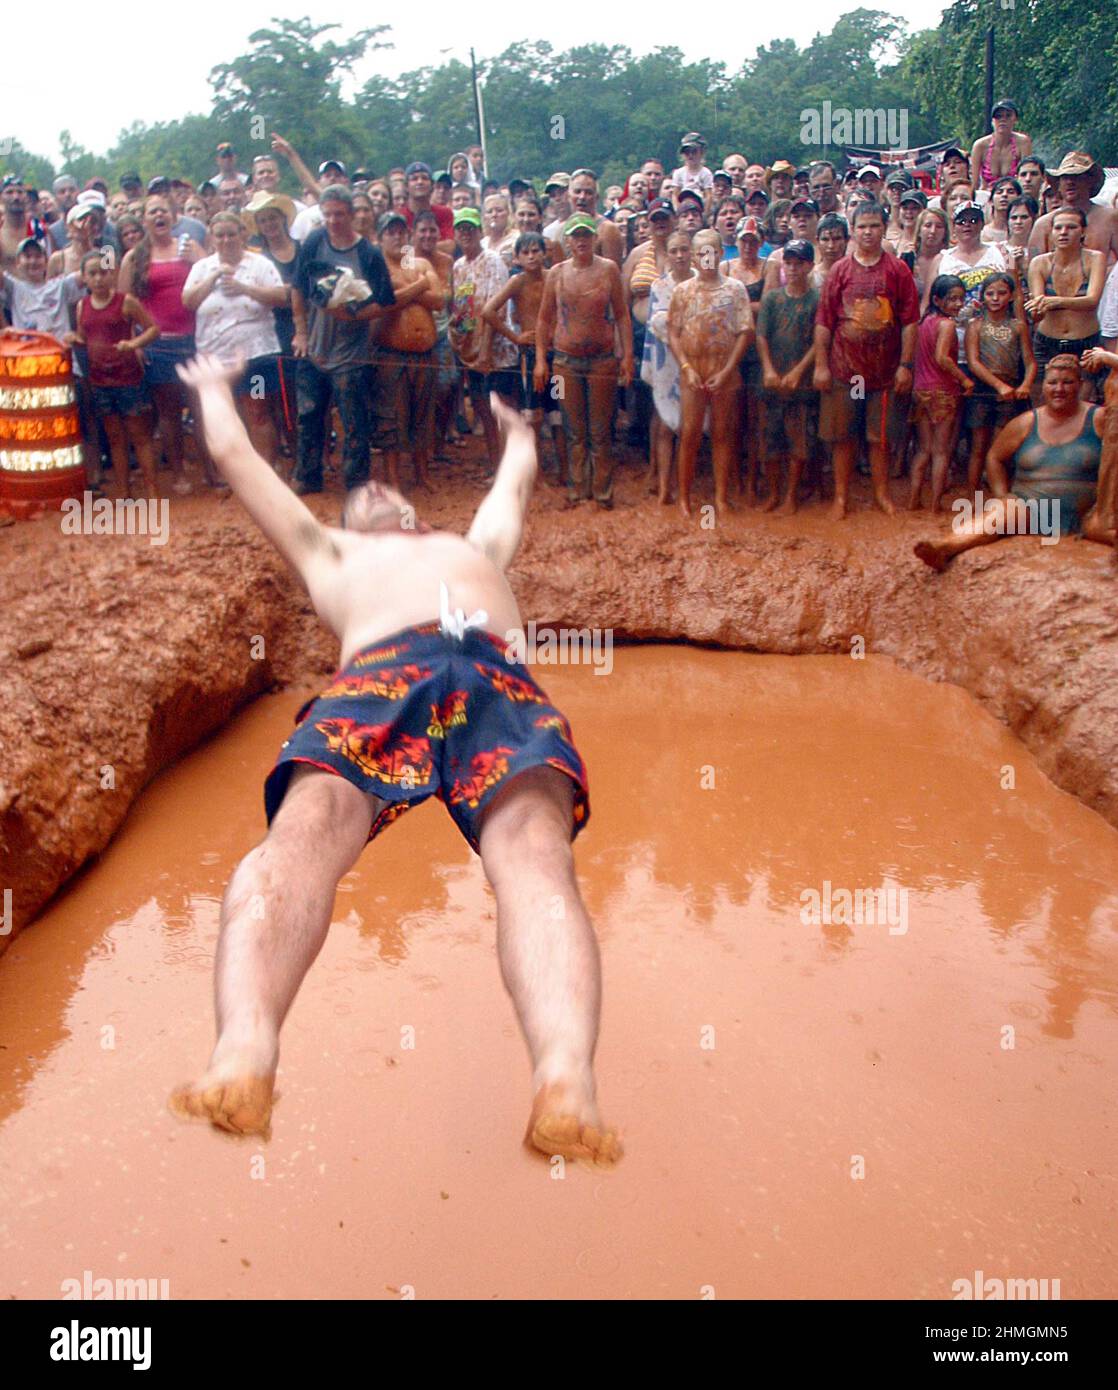 BACK FLIP BELLY FLOP AT THE MUD PIT AT THE REDNECK GAMES EAST DUBLIN GEORGIA USA. THE GAMES WERE  STARTED IN 1996 AS A RIVAL TO THE OLYMPIC GAMES HELD IN ATLANTA AND FEATURE AN UNUSUAL RANGE OF SPORTS FROM DUCKING TO PIGS FEET TO BELLY FLOPPING IN TO A MUD PIT. THE GAMES IN THERE TENTH YEAR NOW DRAW UP TO 10,000 REDNECKS FROM THE HEART OF REDNECK LAND GEORGIA STATE. PICTURES: GARYROBERTSPHOTO.COM Stock Photo